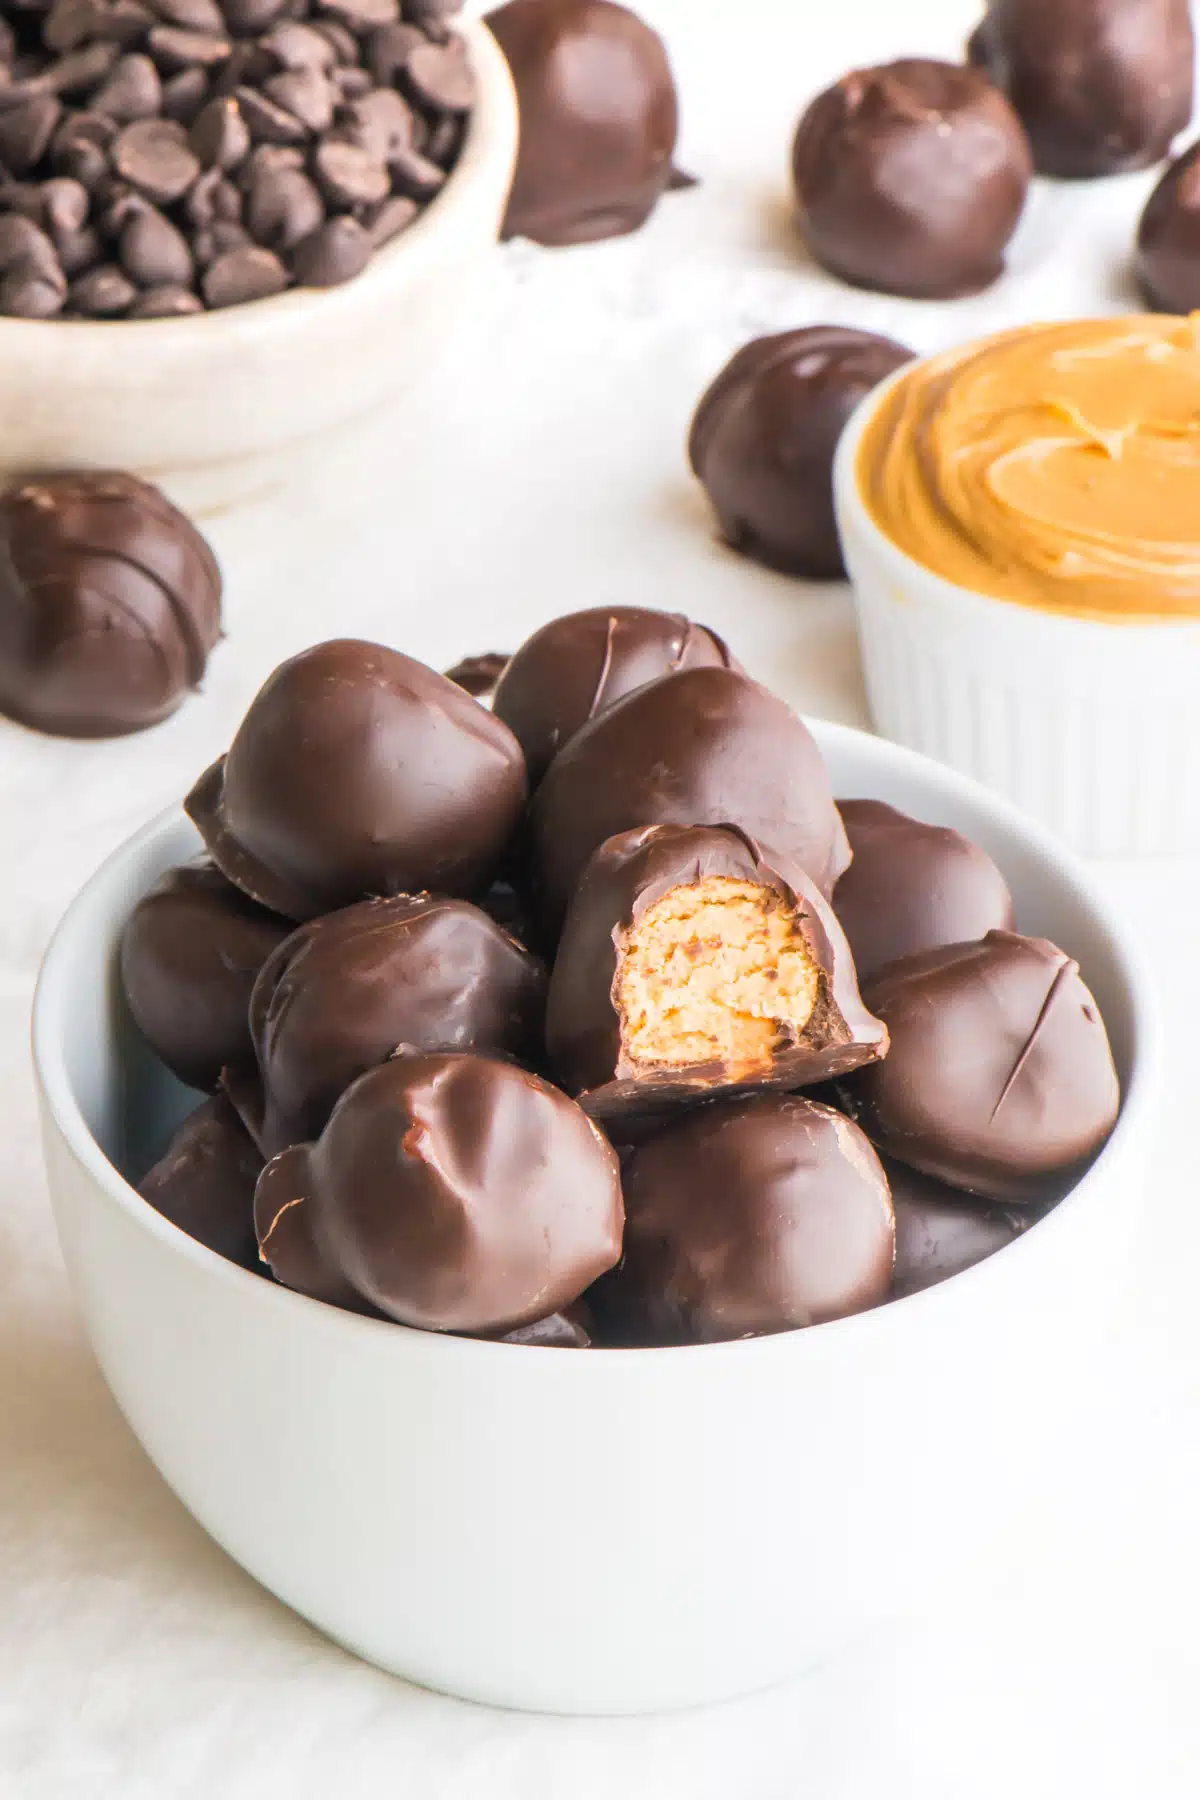 Vegan Peanut Butter Balls in a bowl. A bite is taken out of one of them showing peanut butter filling.